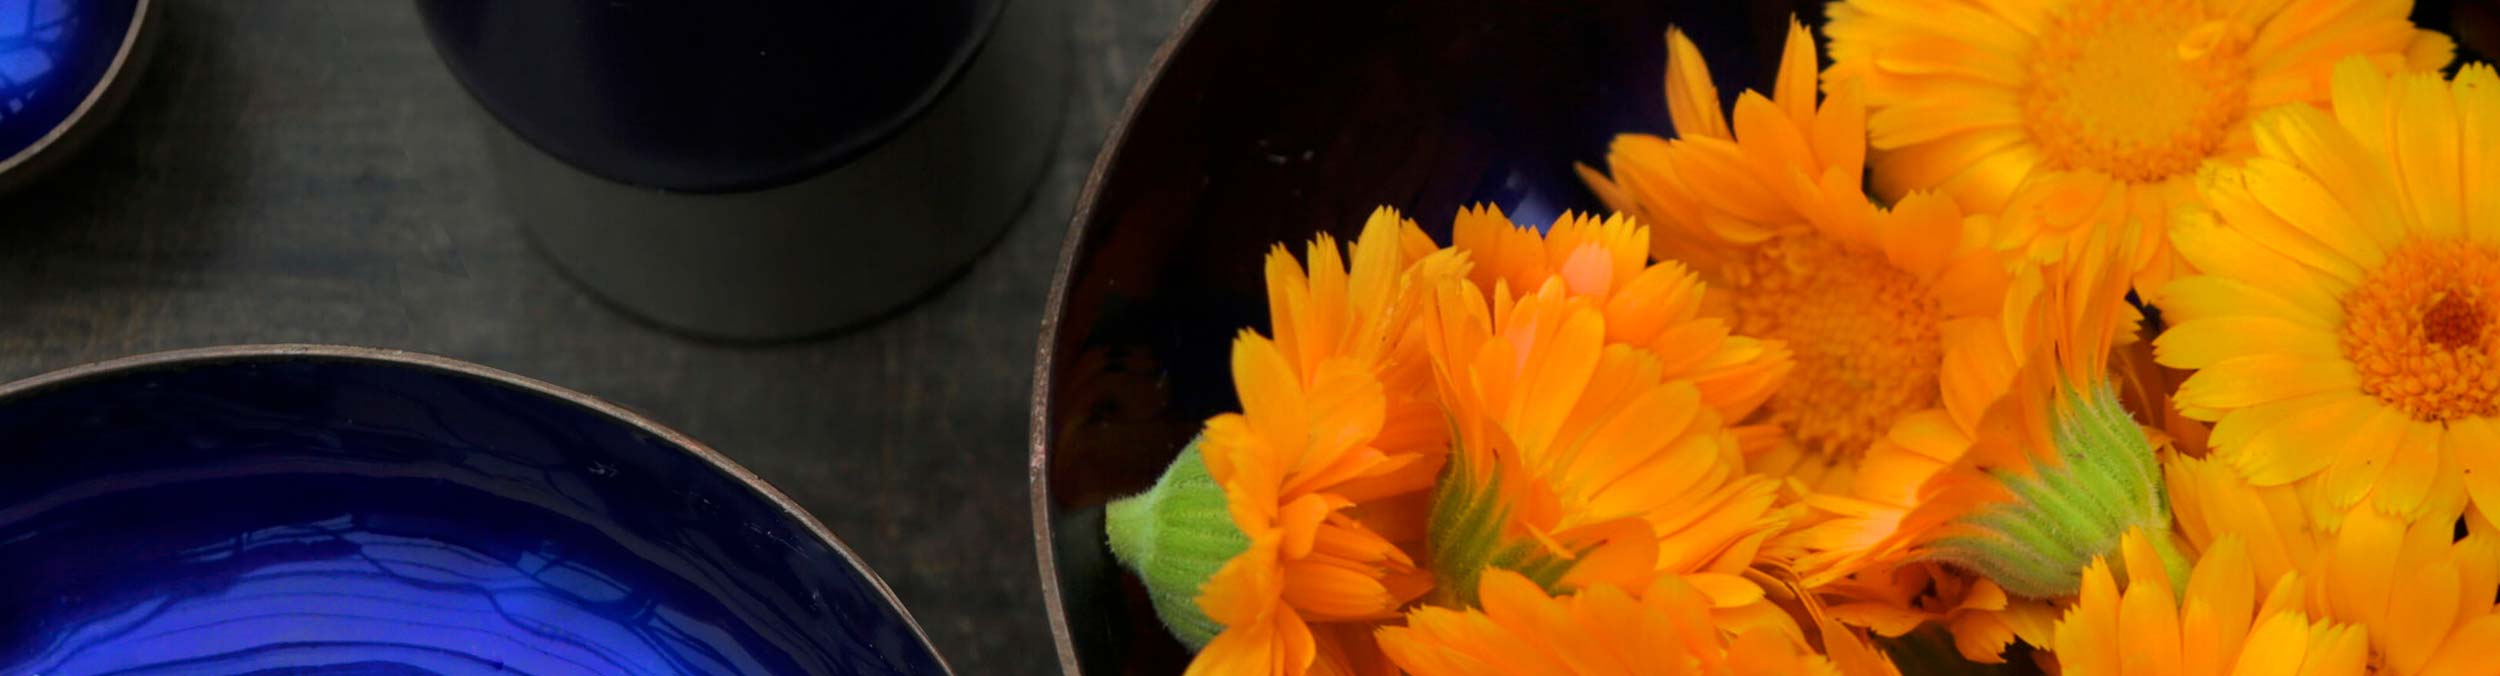 Calendula flowers cut and in a bowl on a table